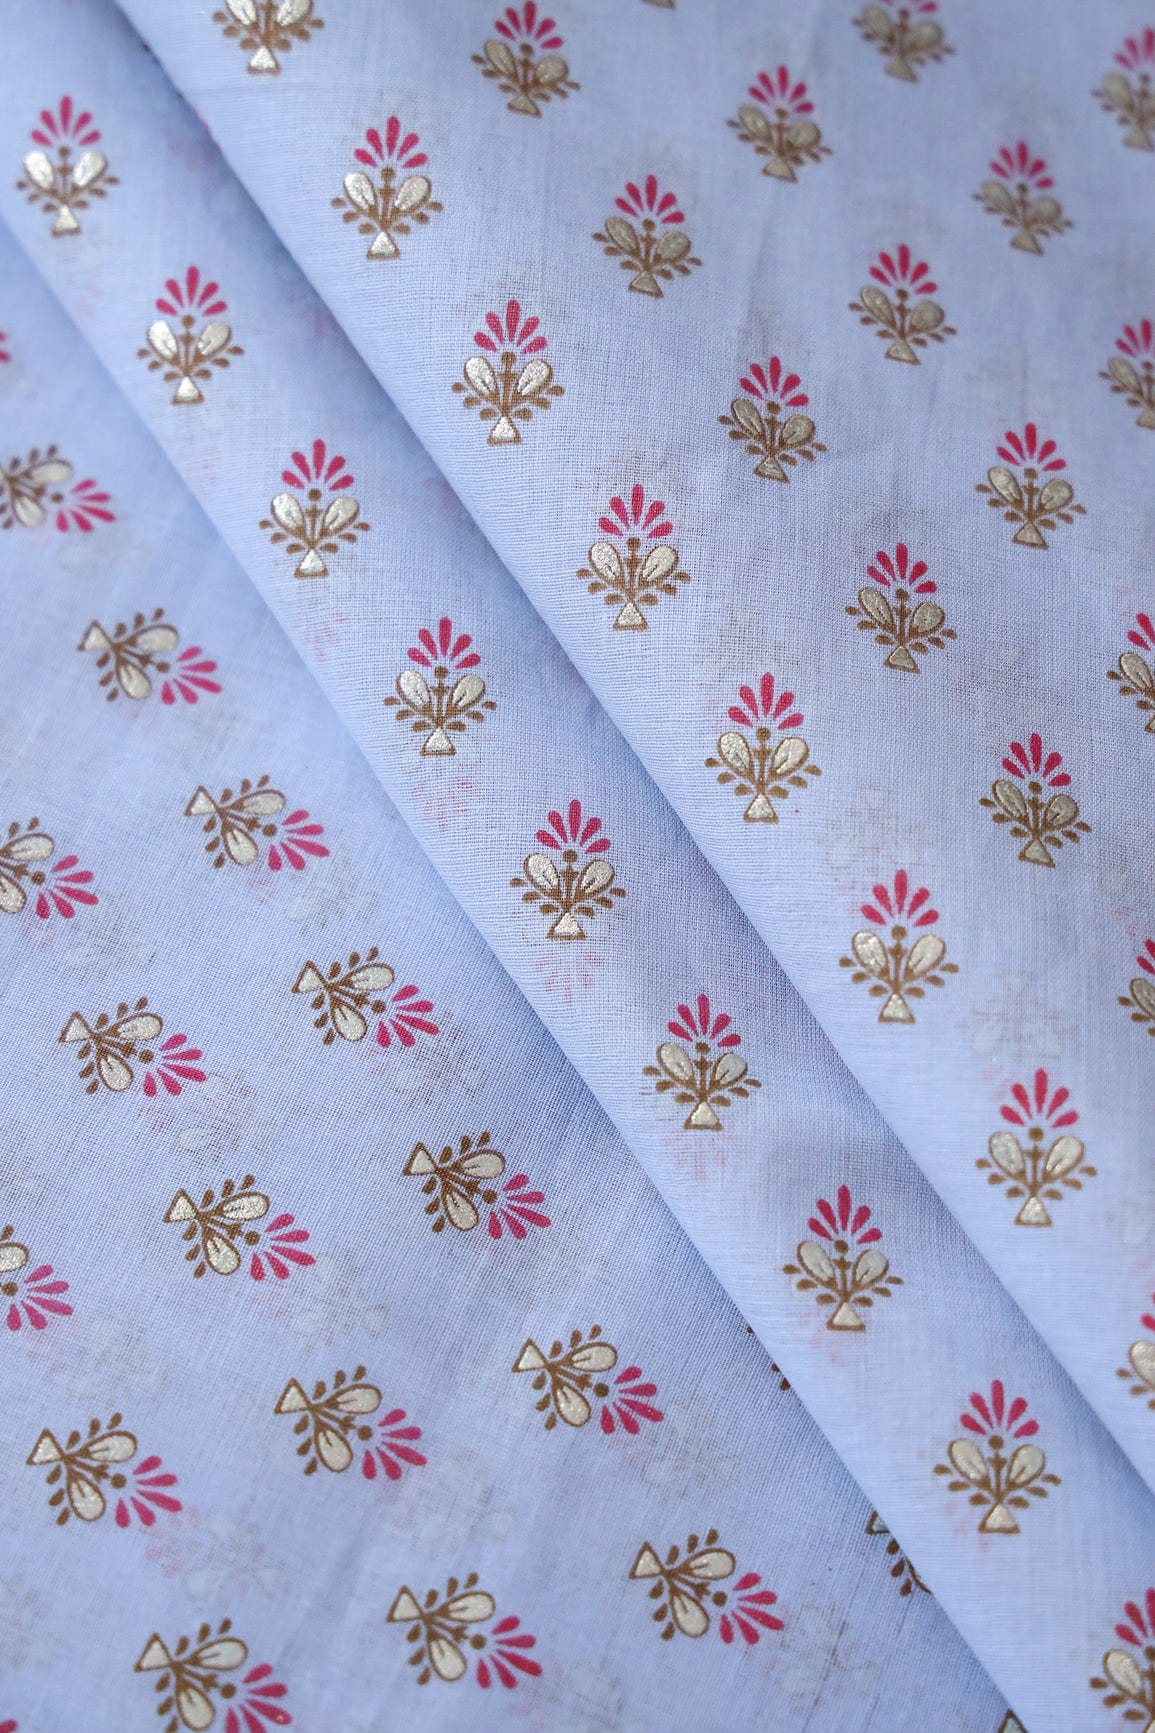 doeraa Prints Dark Pink And Brown Small Floral Booti Foil Print On Pastel Blue Organic Cotton Fabric